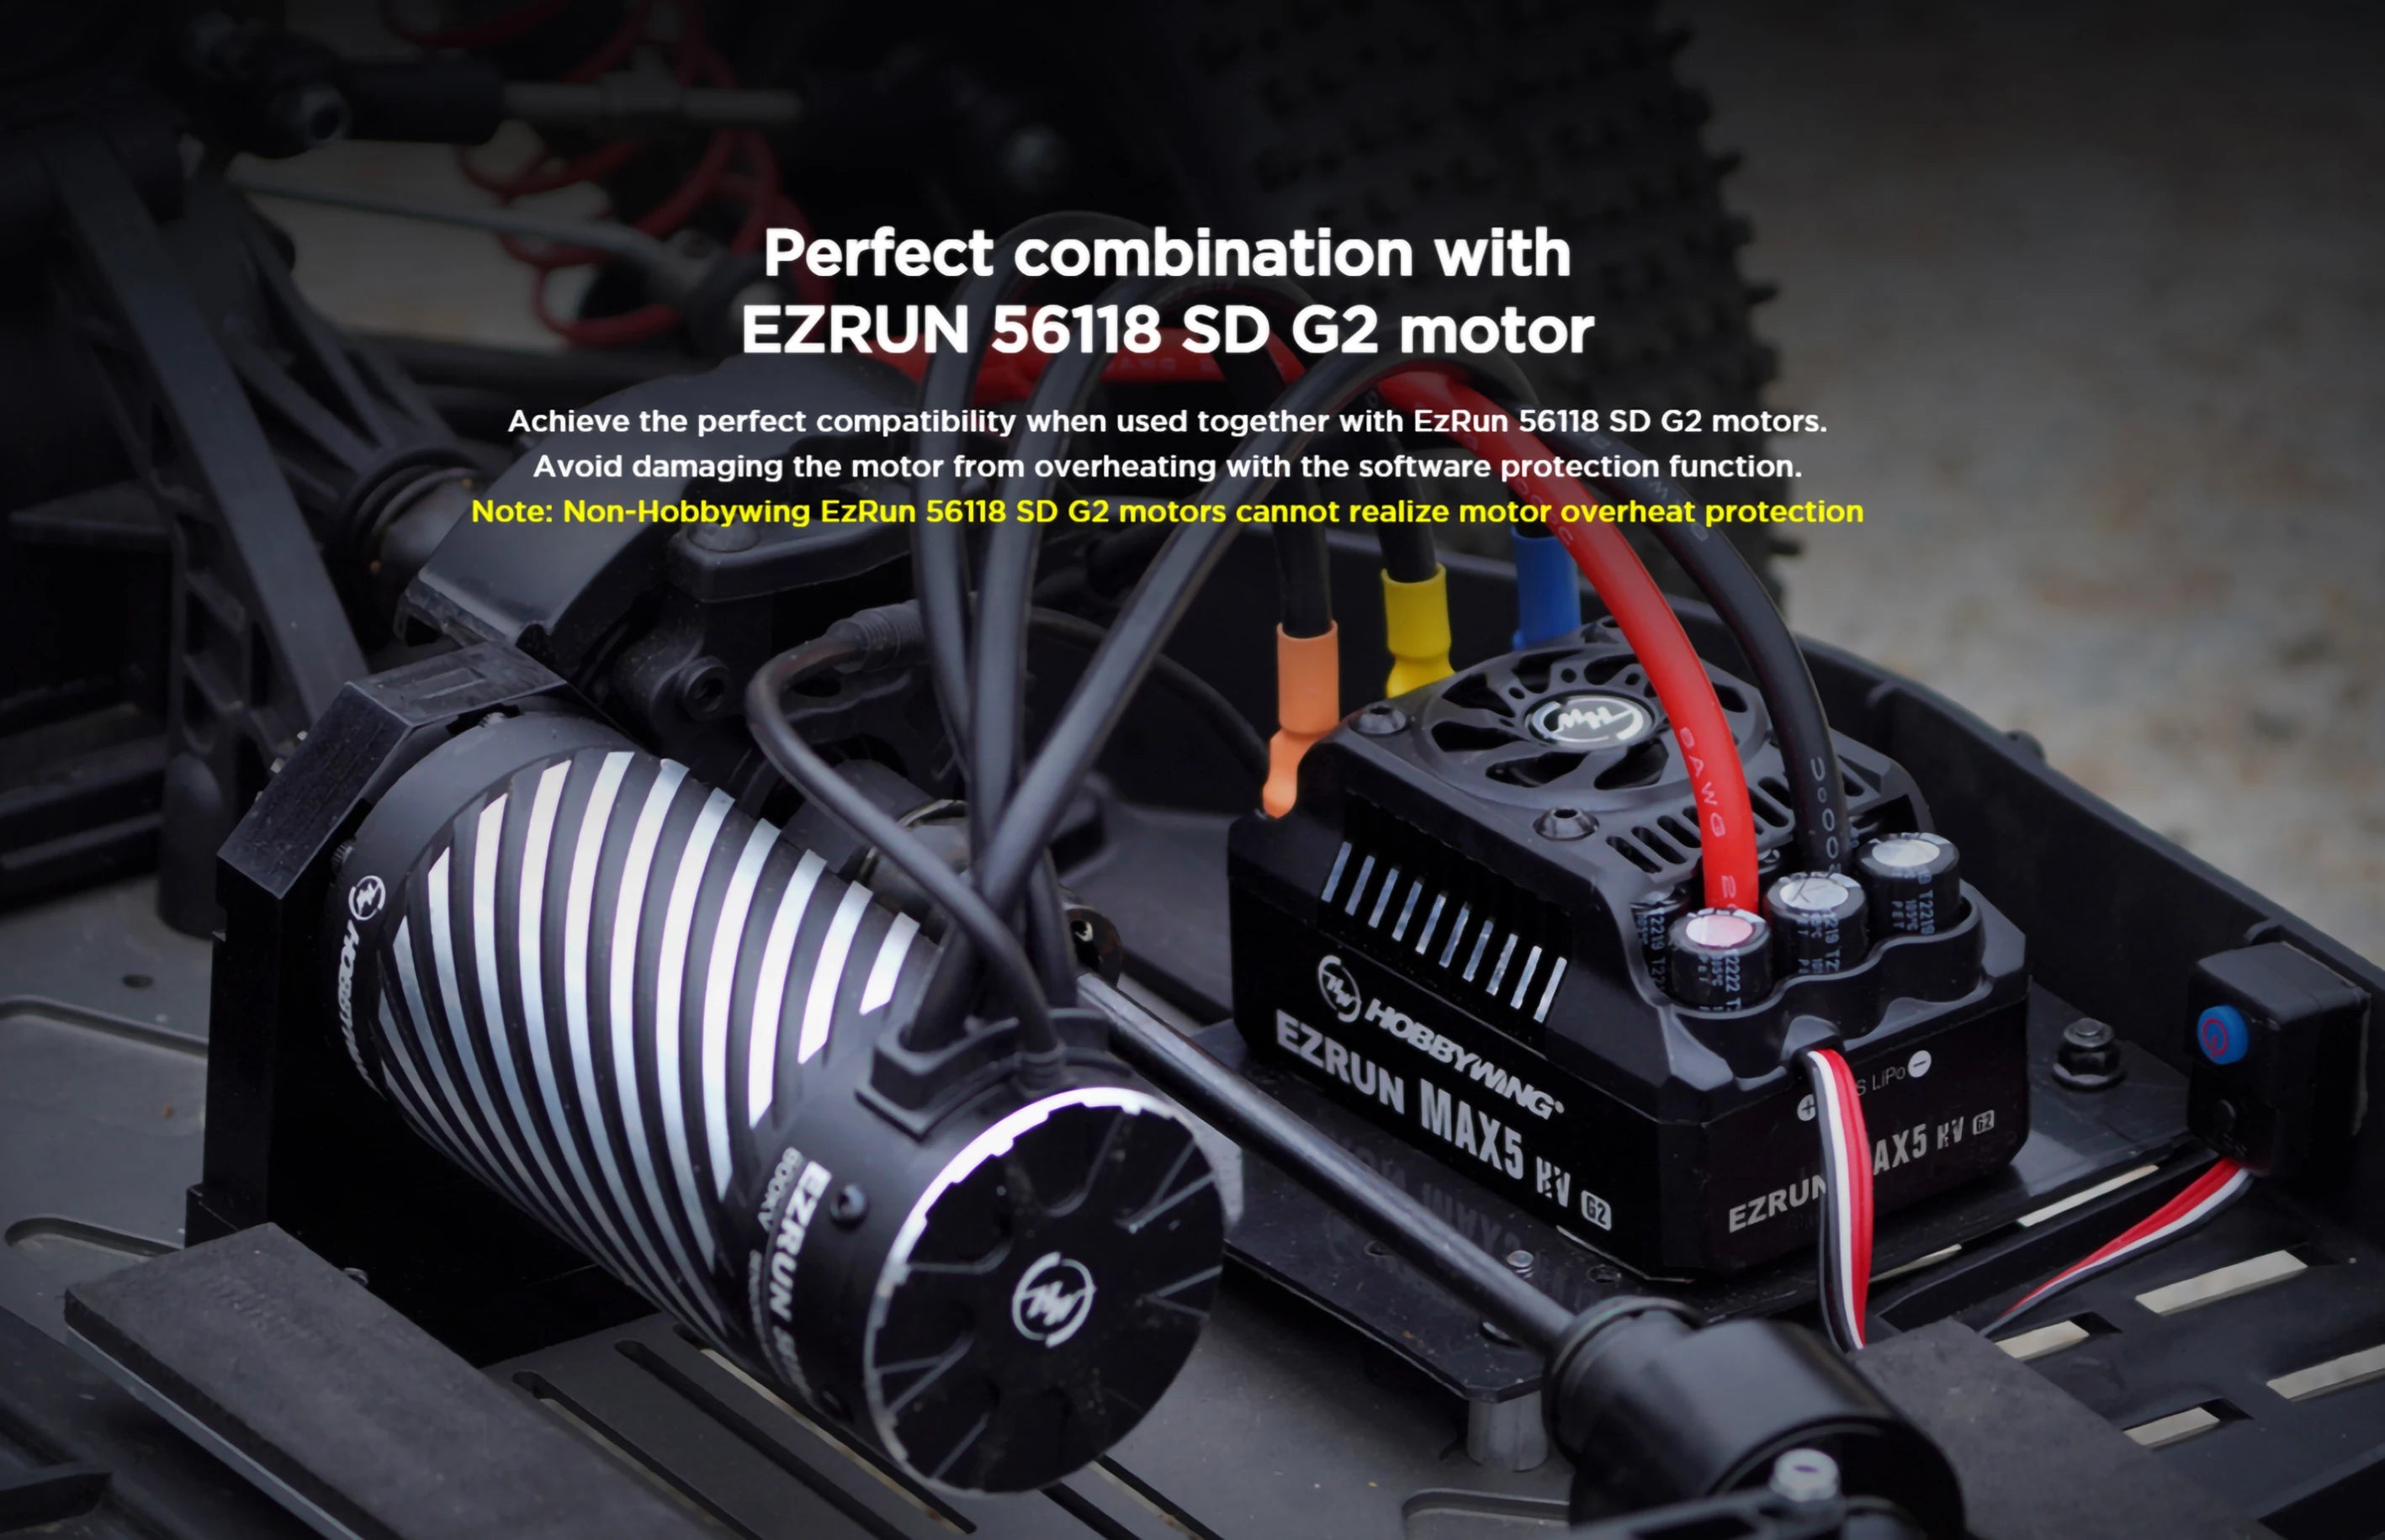 Hobbywing EZRUN MAX5 HV G2 ESC, avoid damaging the motor from overheating with the software protection function .